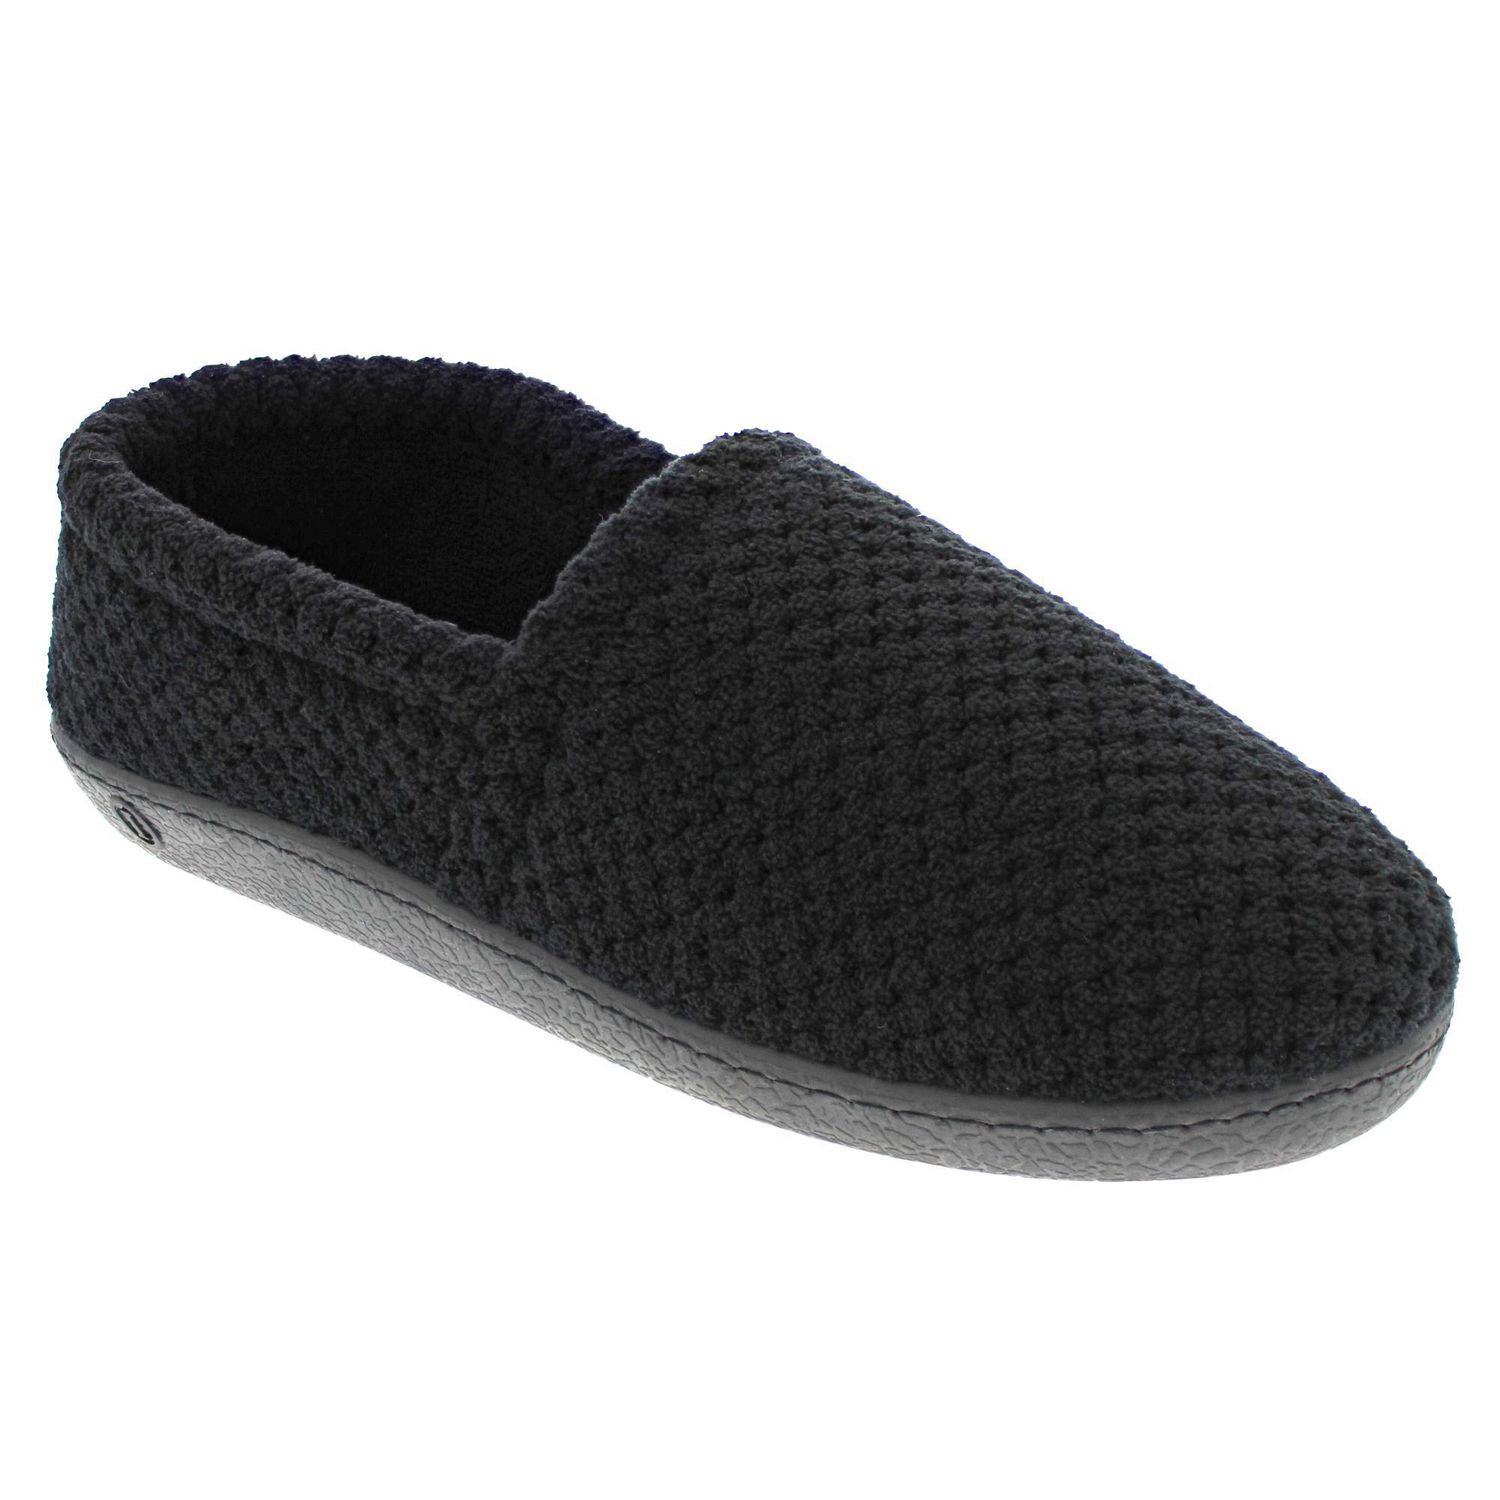 ISOspa by isotoner® Women's Diane Popcorn Microterry Espadrille ...